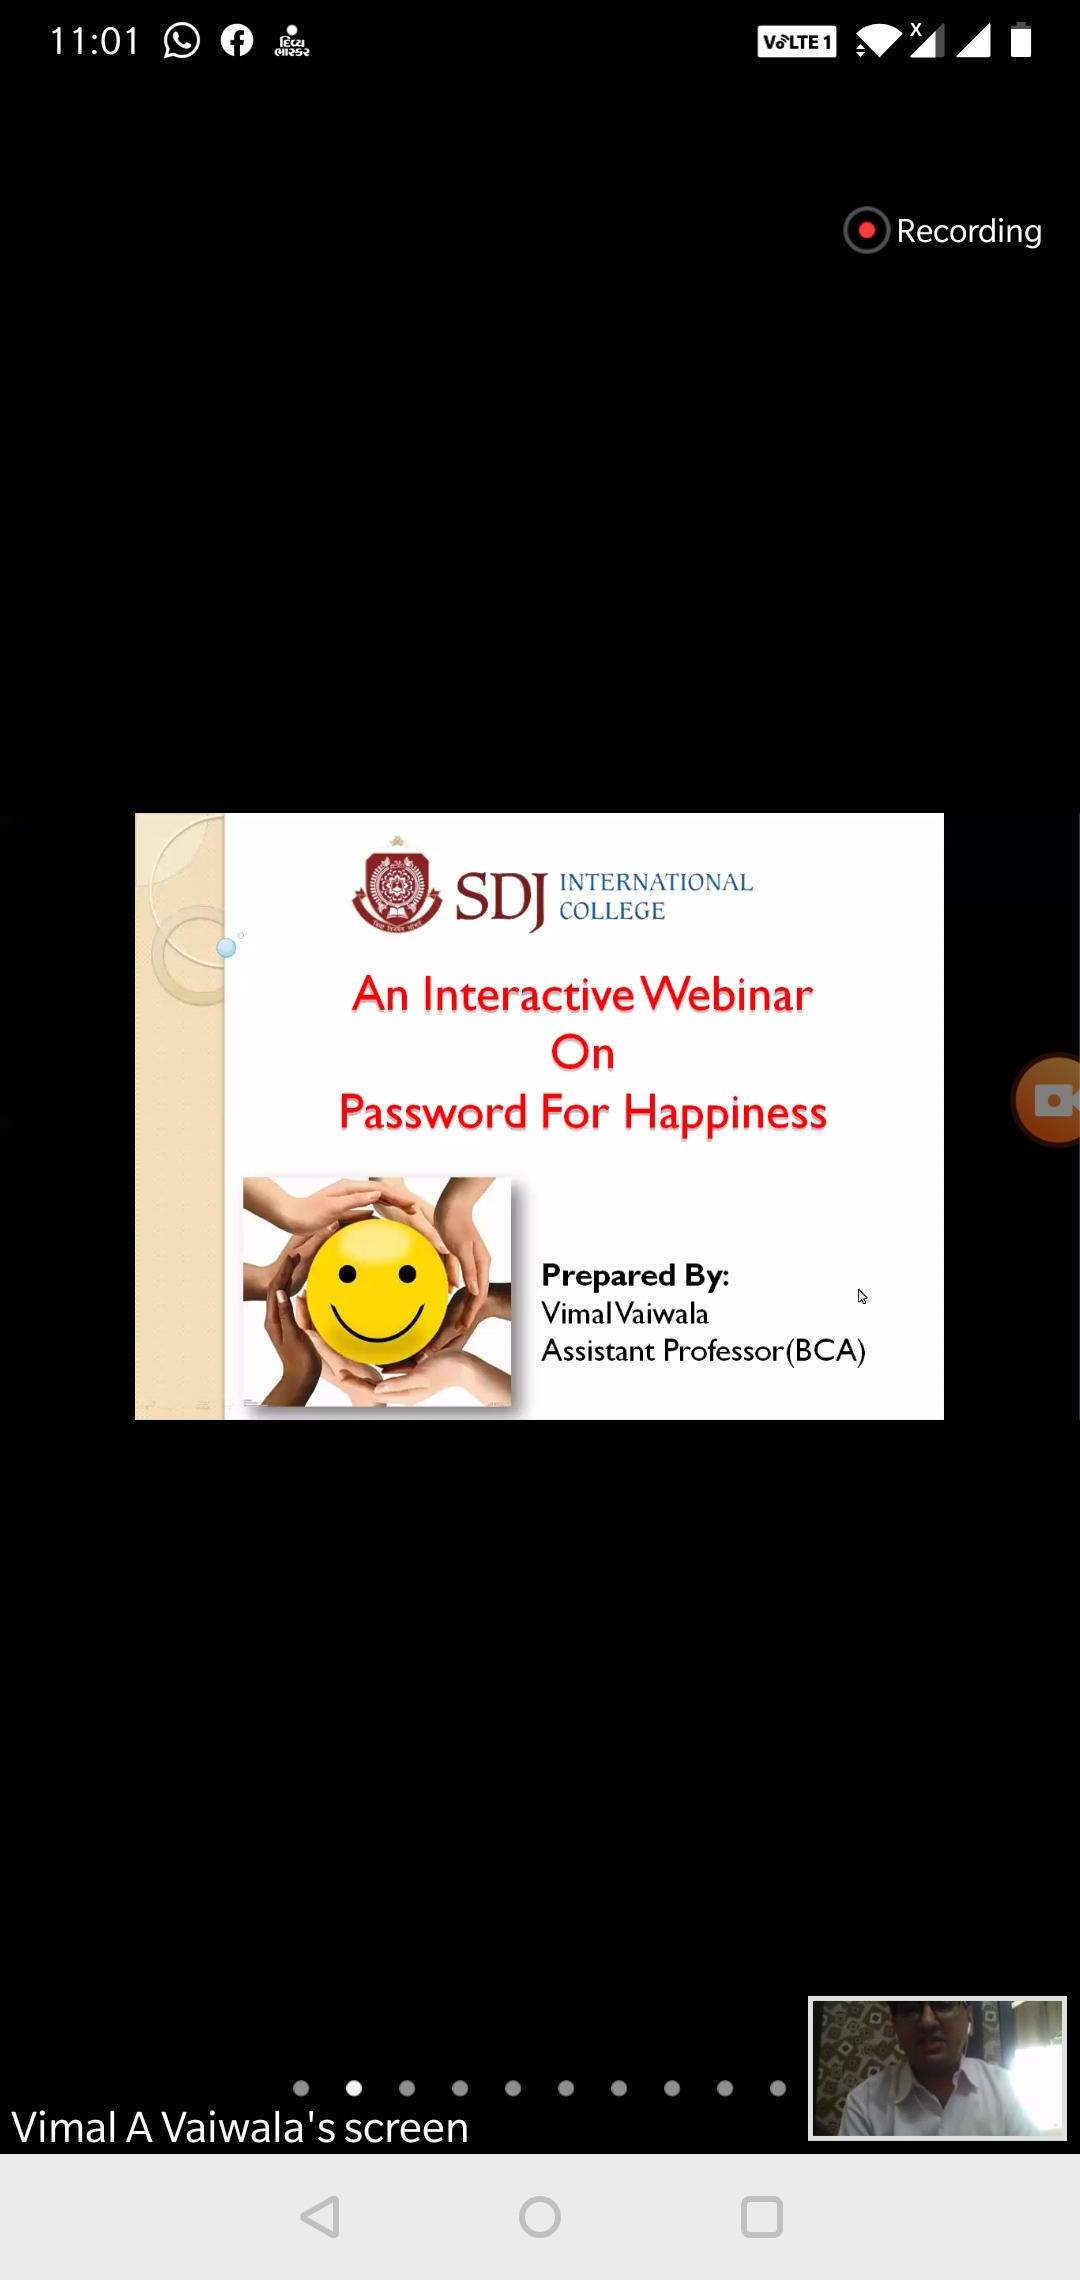 Webinar on “Password for Happiness” by Prof. Vimal Vaiwala